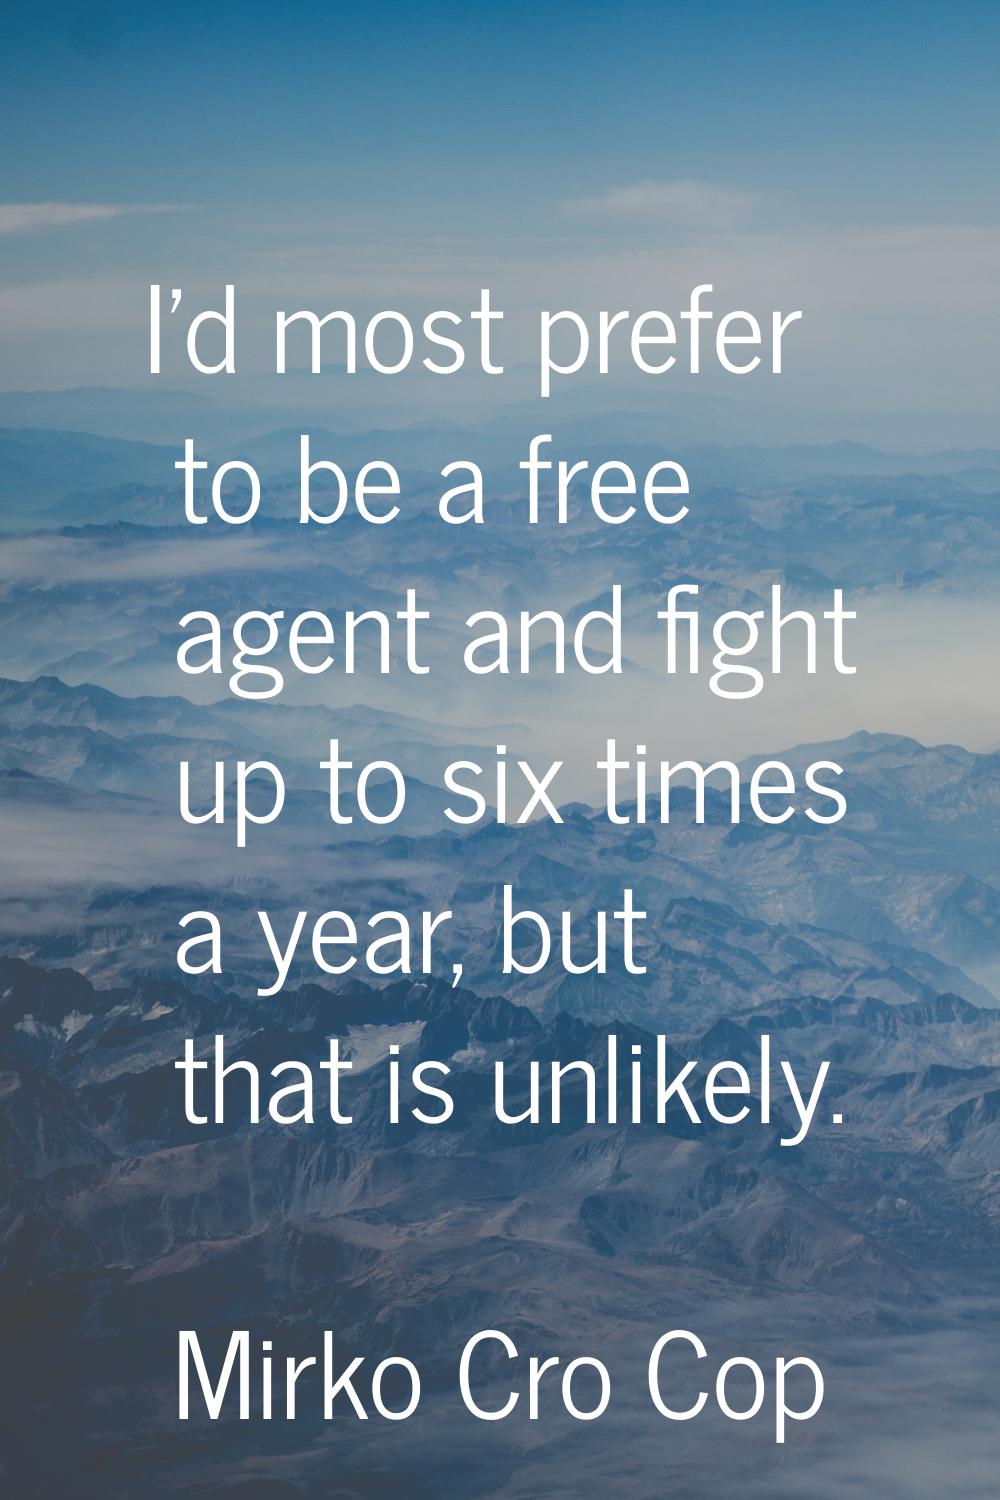 I'd most prefer to be a free agent and fight up to six times a year, but that is unlikely.